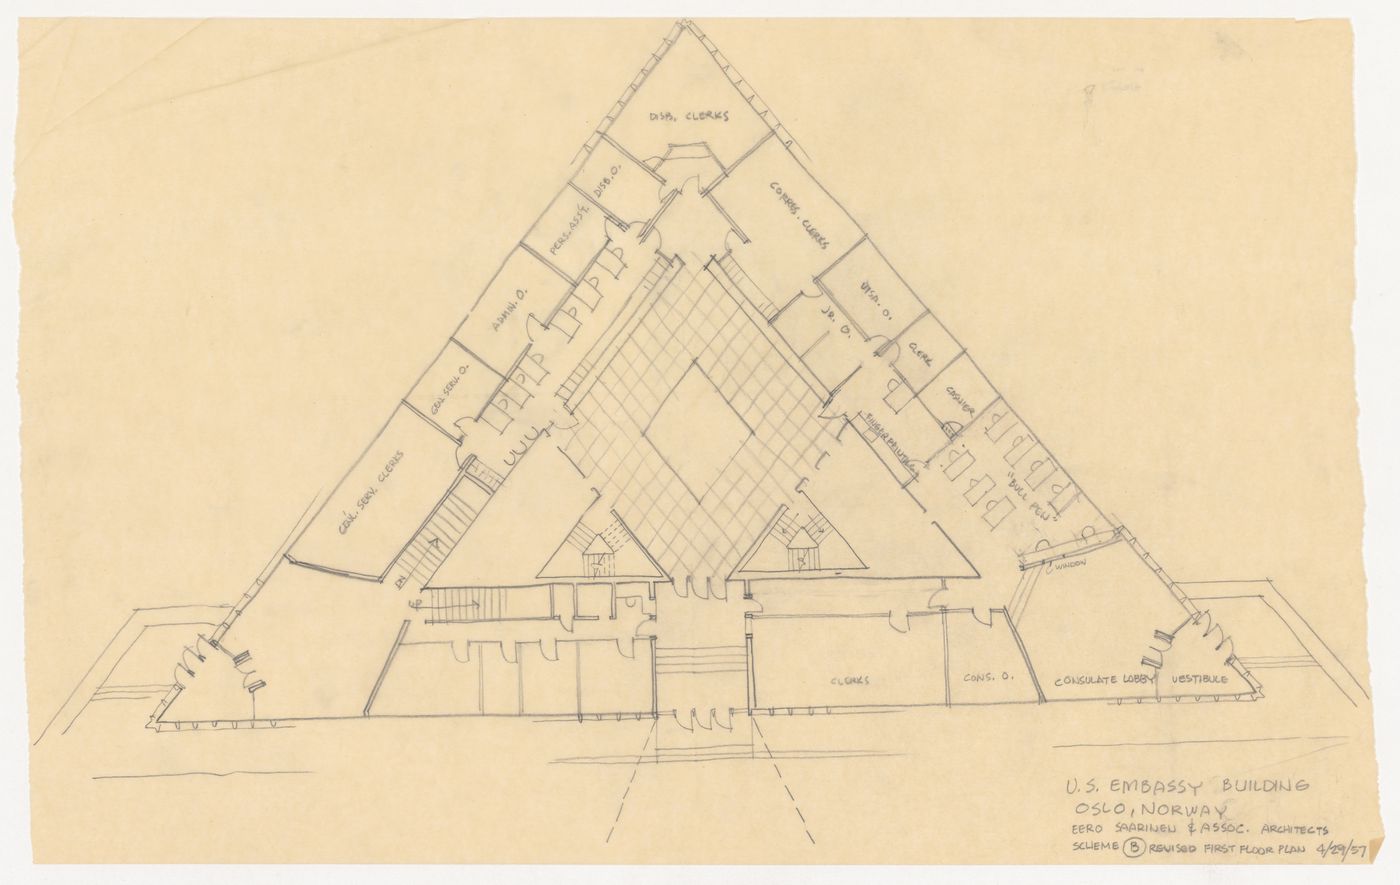 First floor plan for United States Embassy, Oslo, Norway